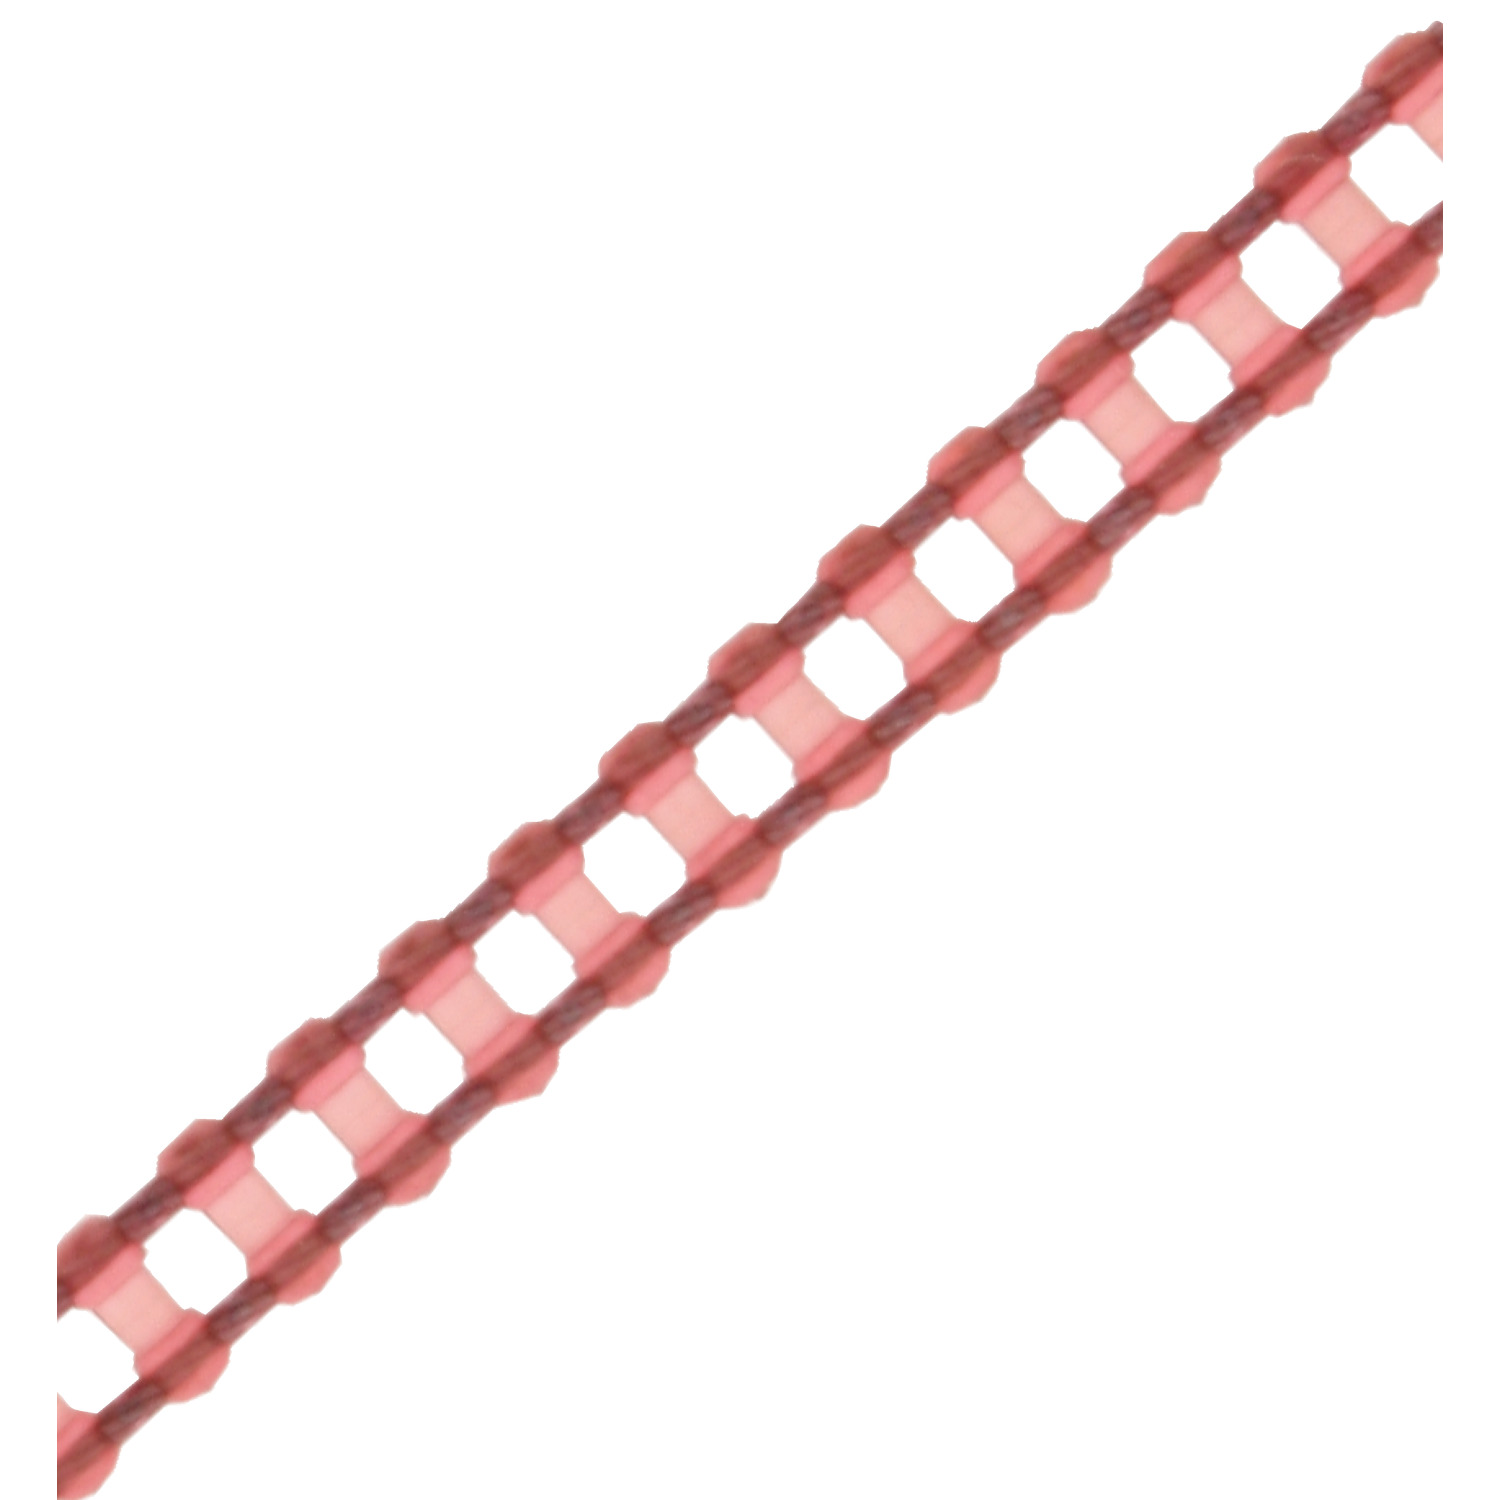 Product R1035, Cable Chains 4mm nominal circular pitch / 